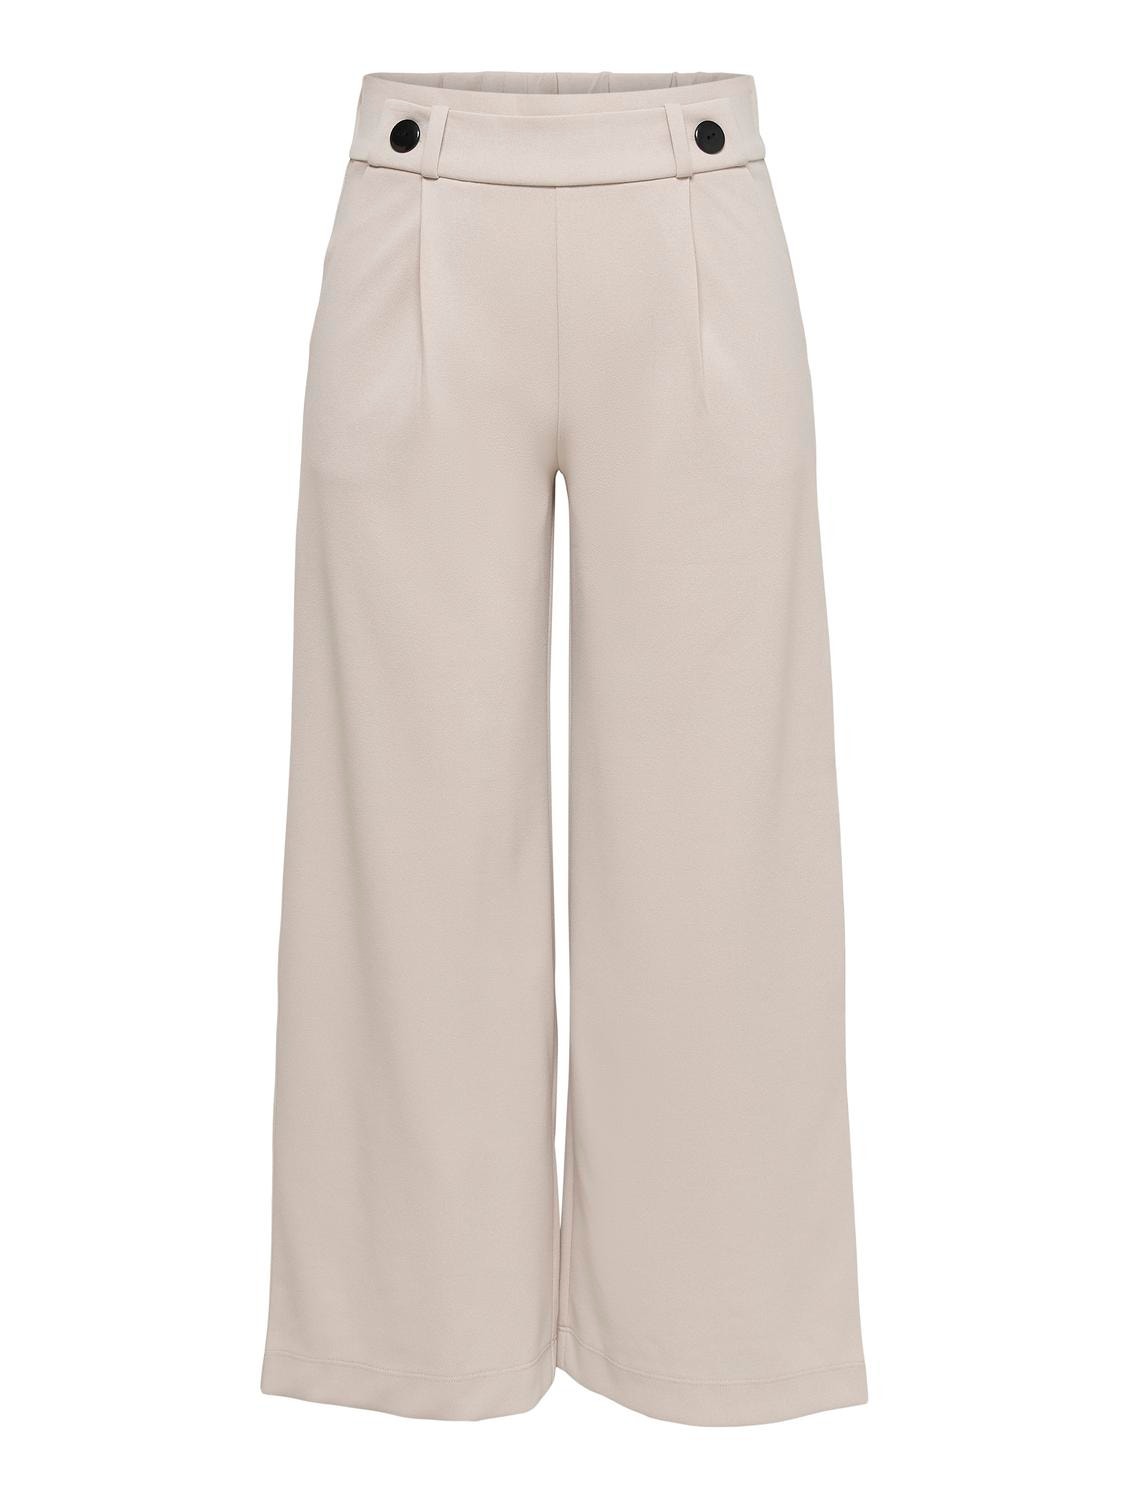 ONLY Wide legs ankle Trousers -Chateau Gray - 15208417